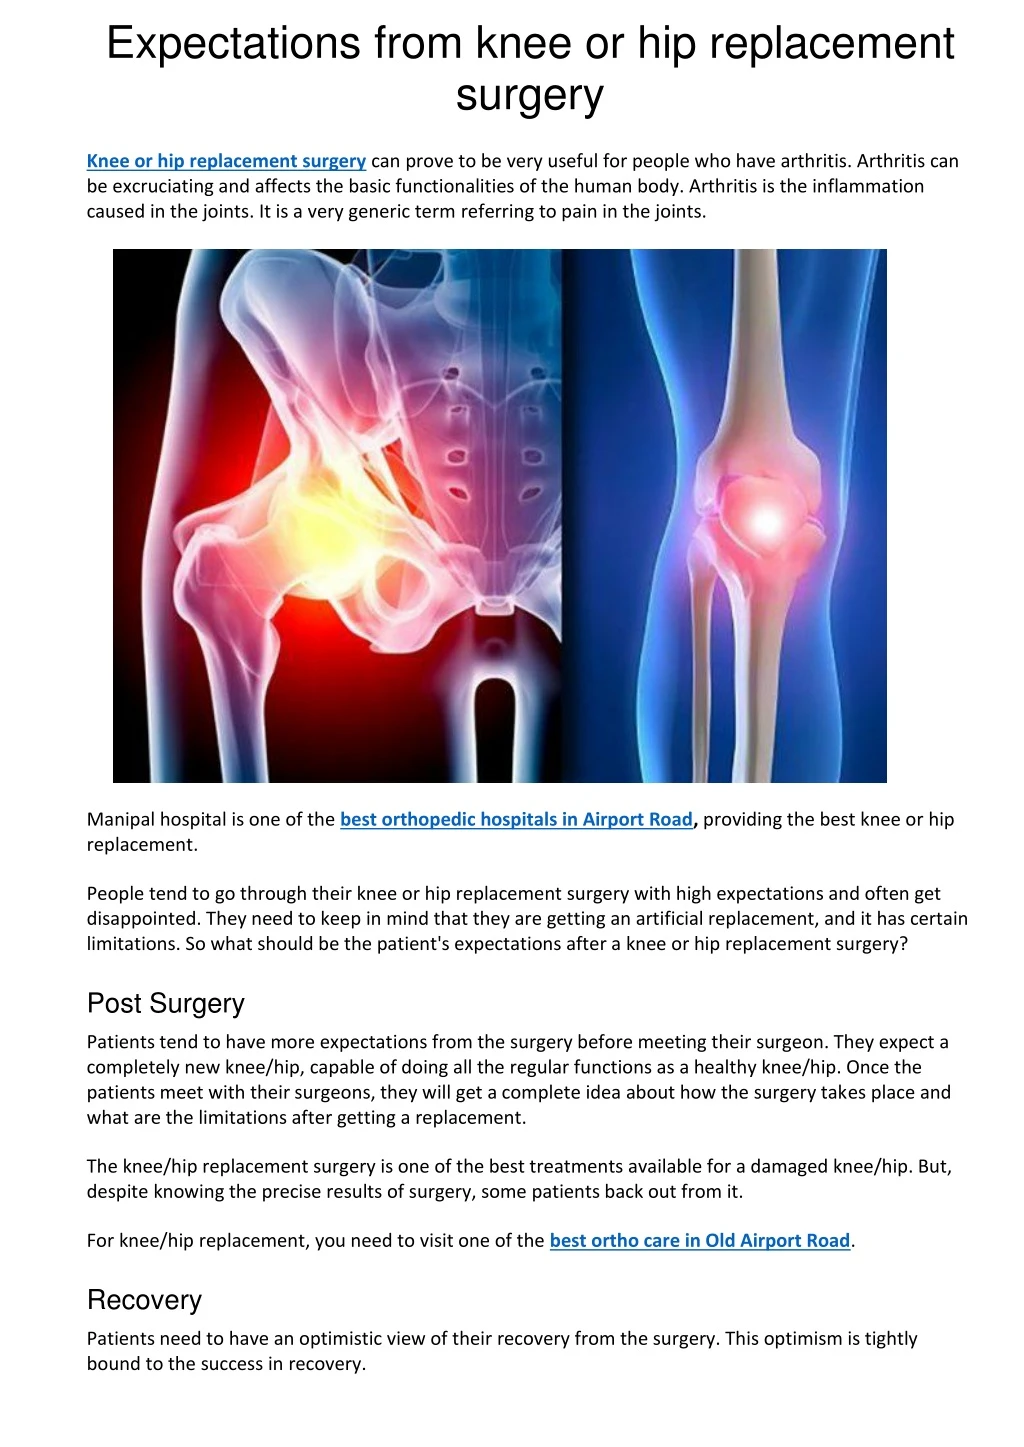 expectations from knee or hip replacement surgery